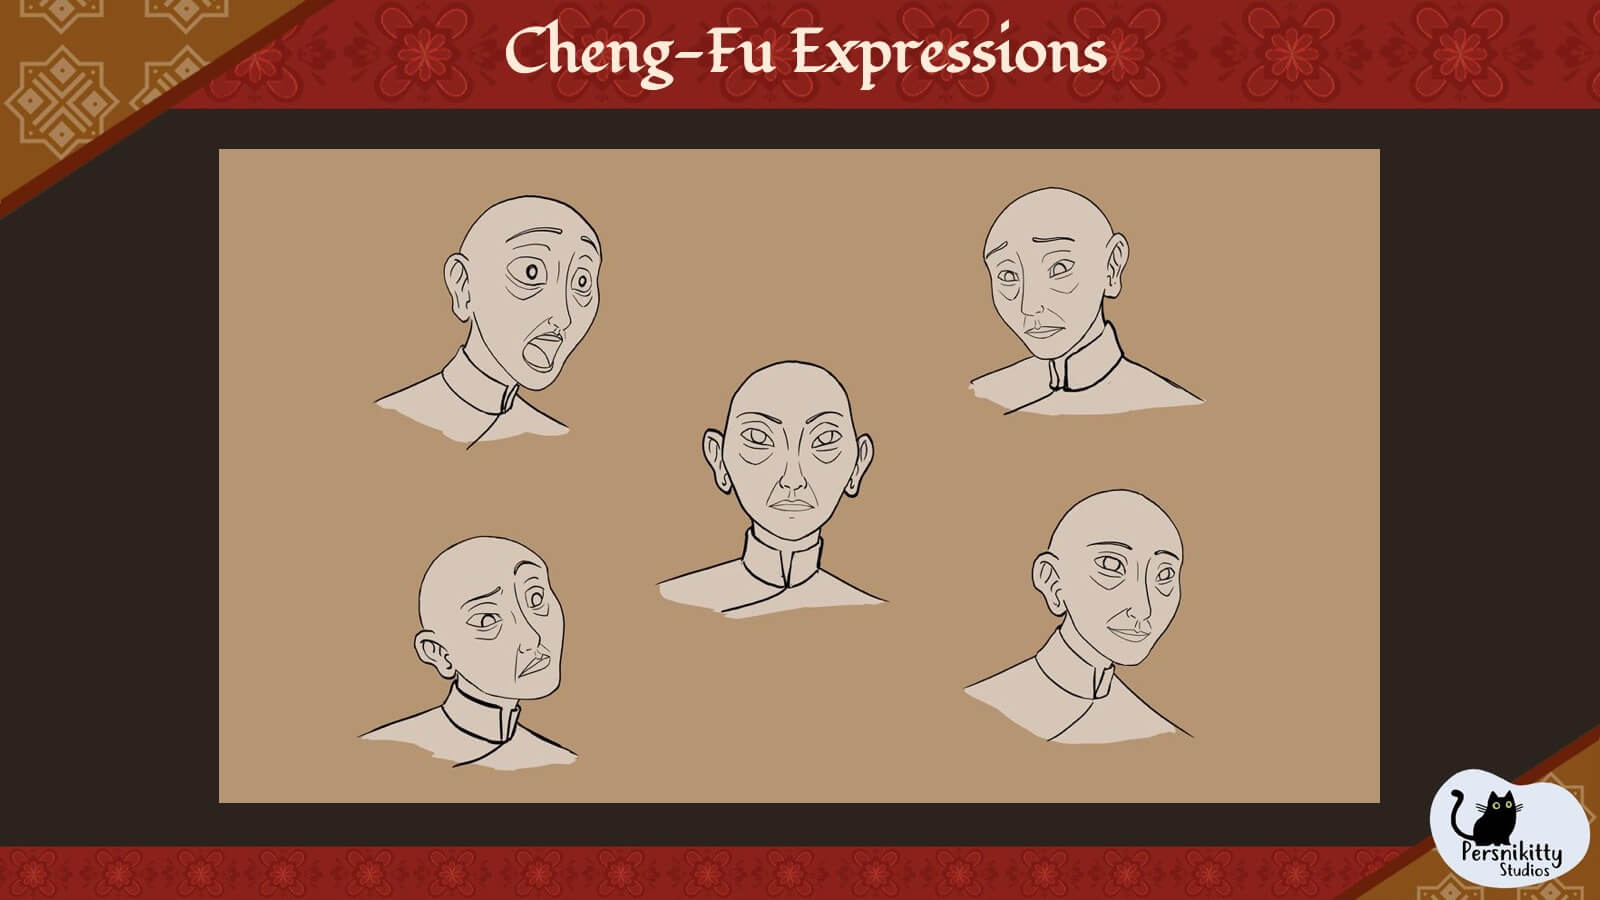 A slide displaying a variety of facial expressions for Master Cheng-Fu.